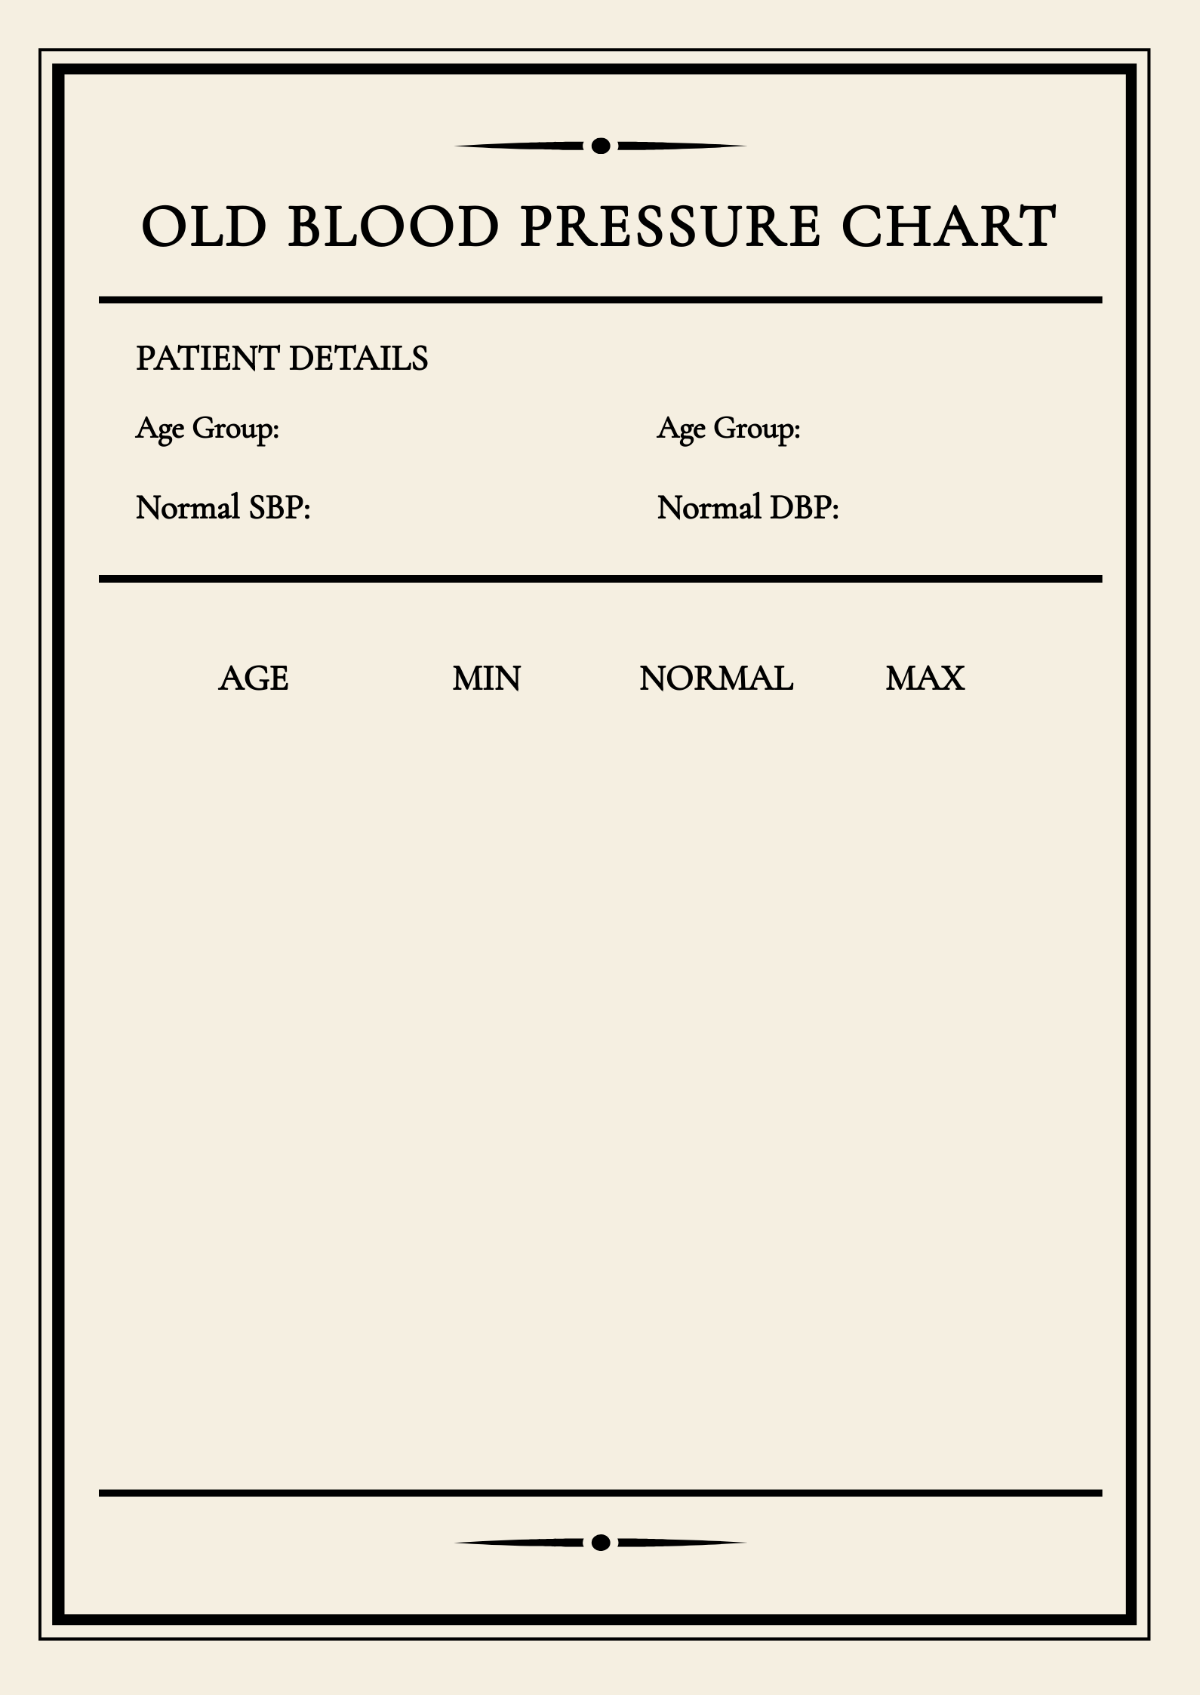 Old Blood Pressure Chart Template